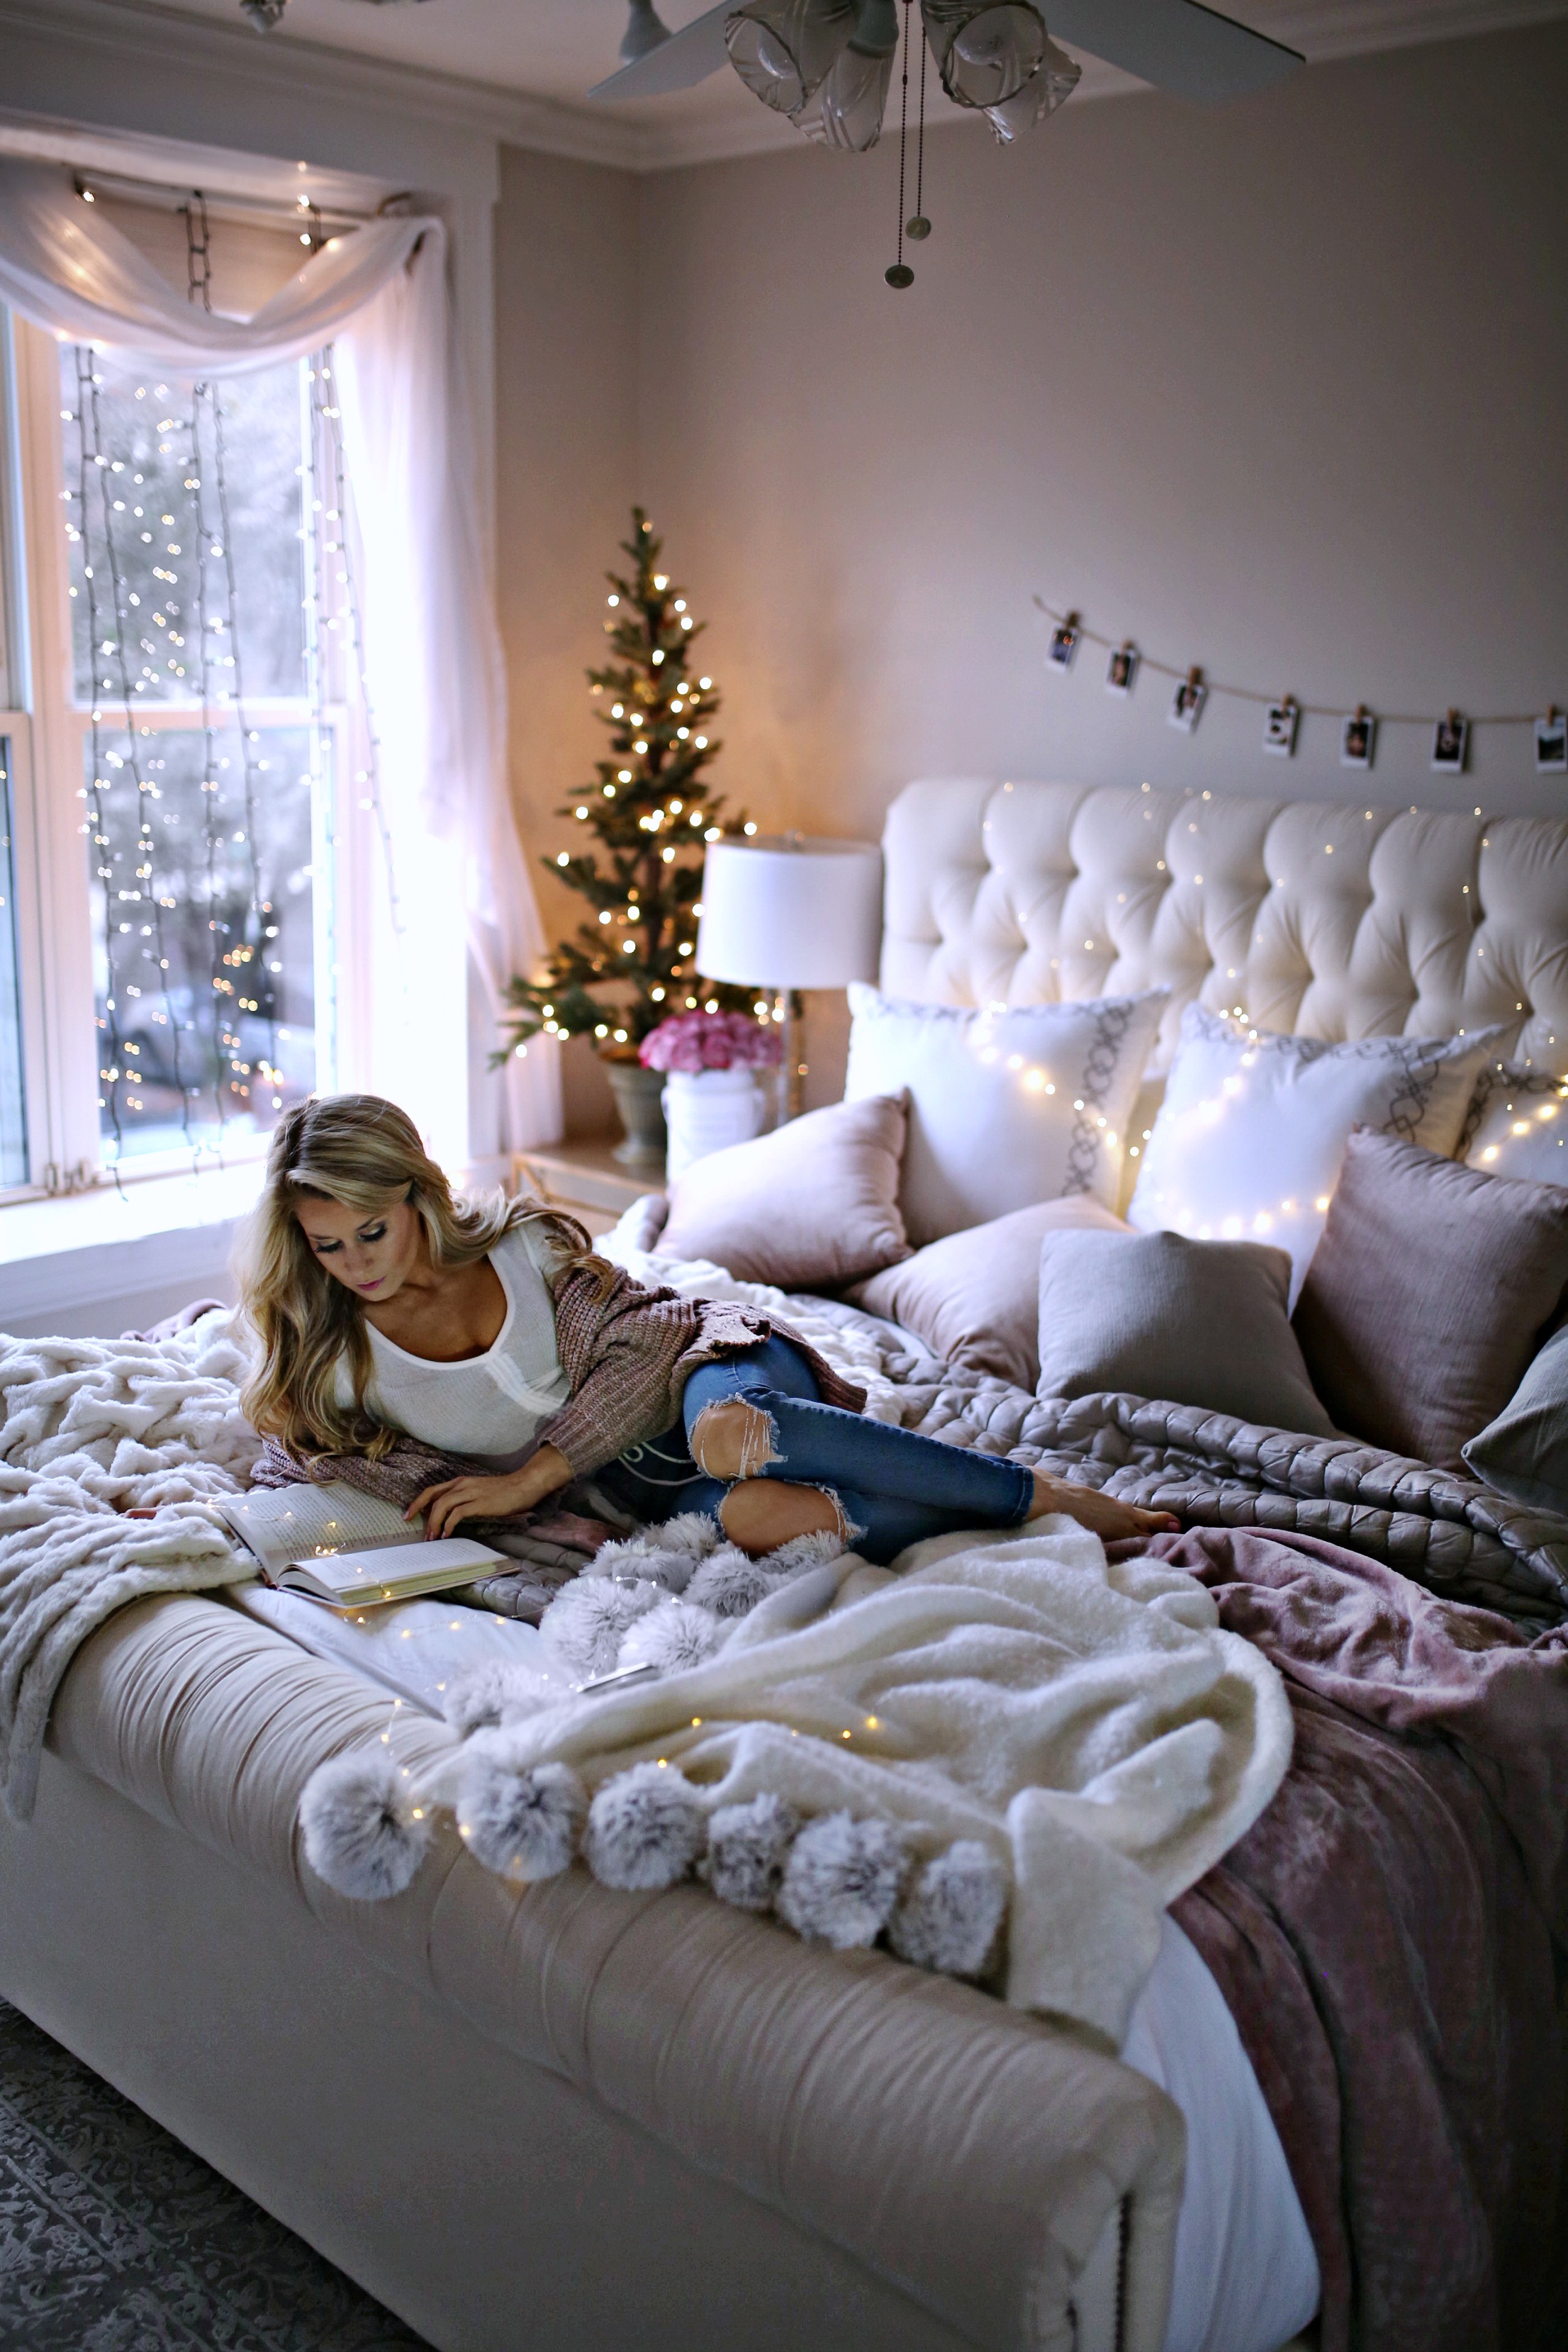 7 Holiday Decor Ideas for Your Bedroom - Welcome to Olivia Rink